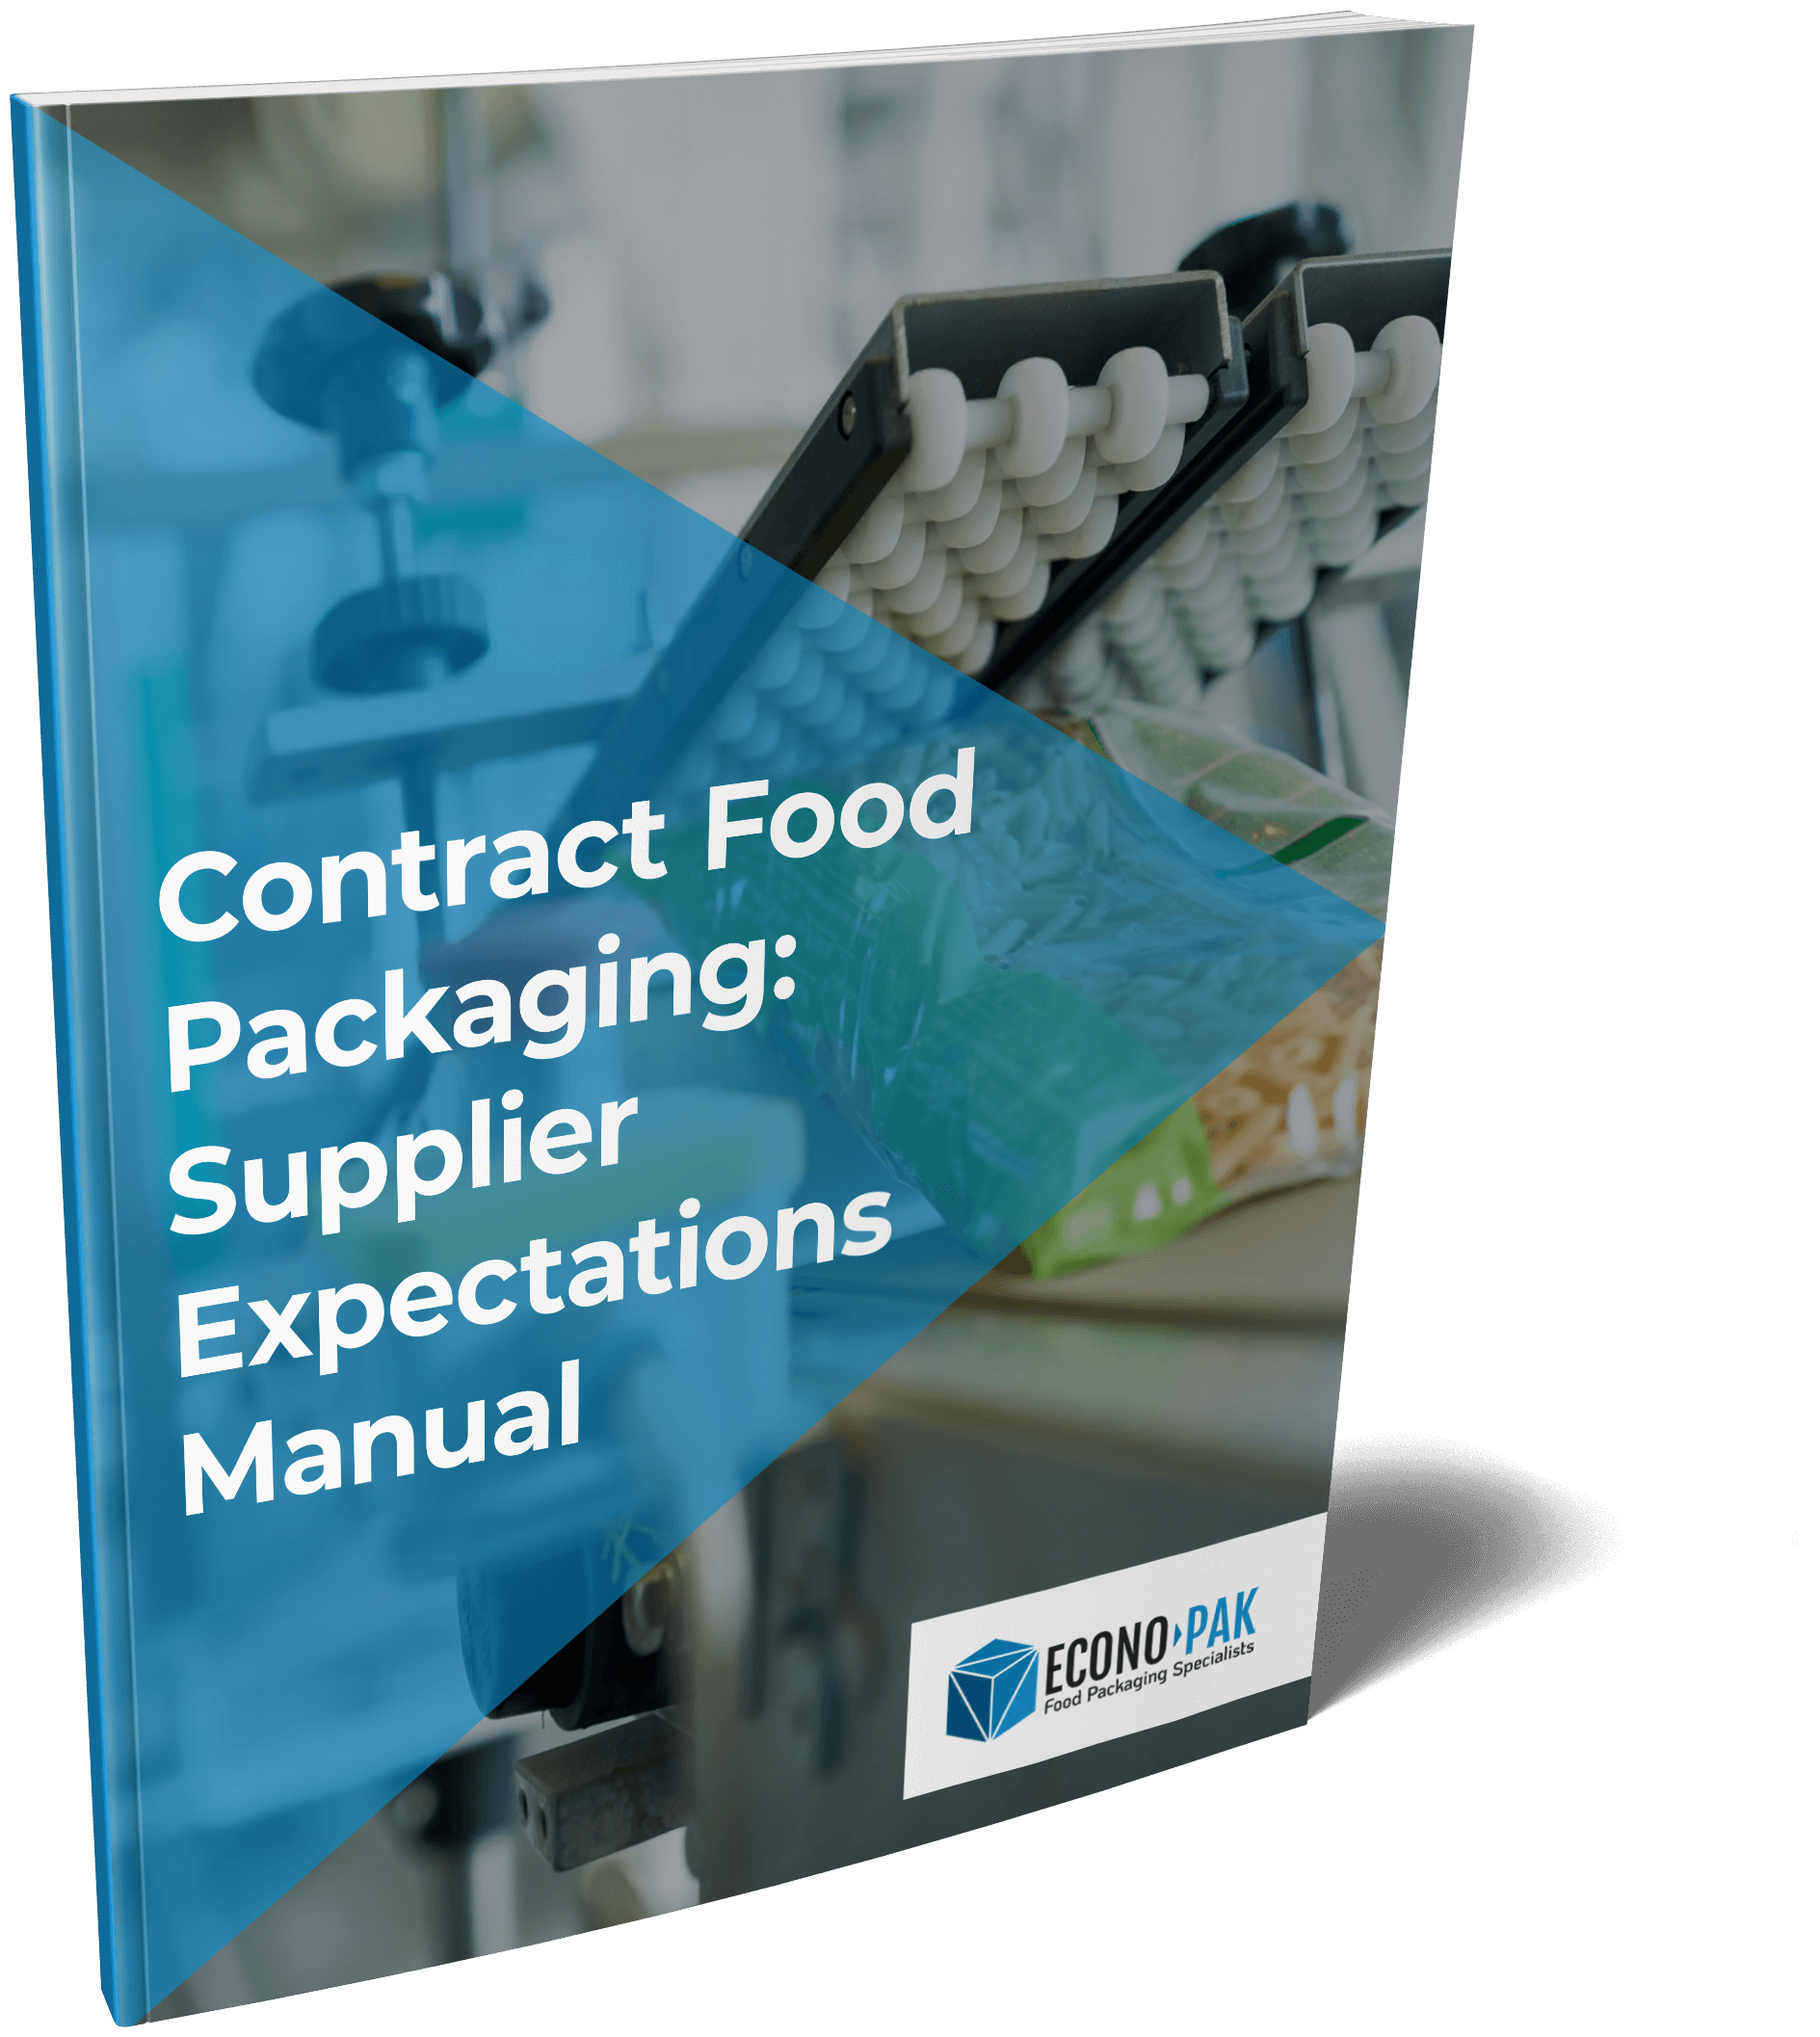 Contract Food Packaging: Supplier Expectations Manual